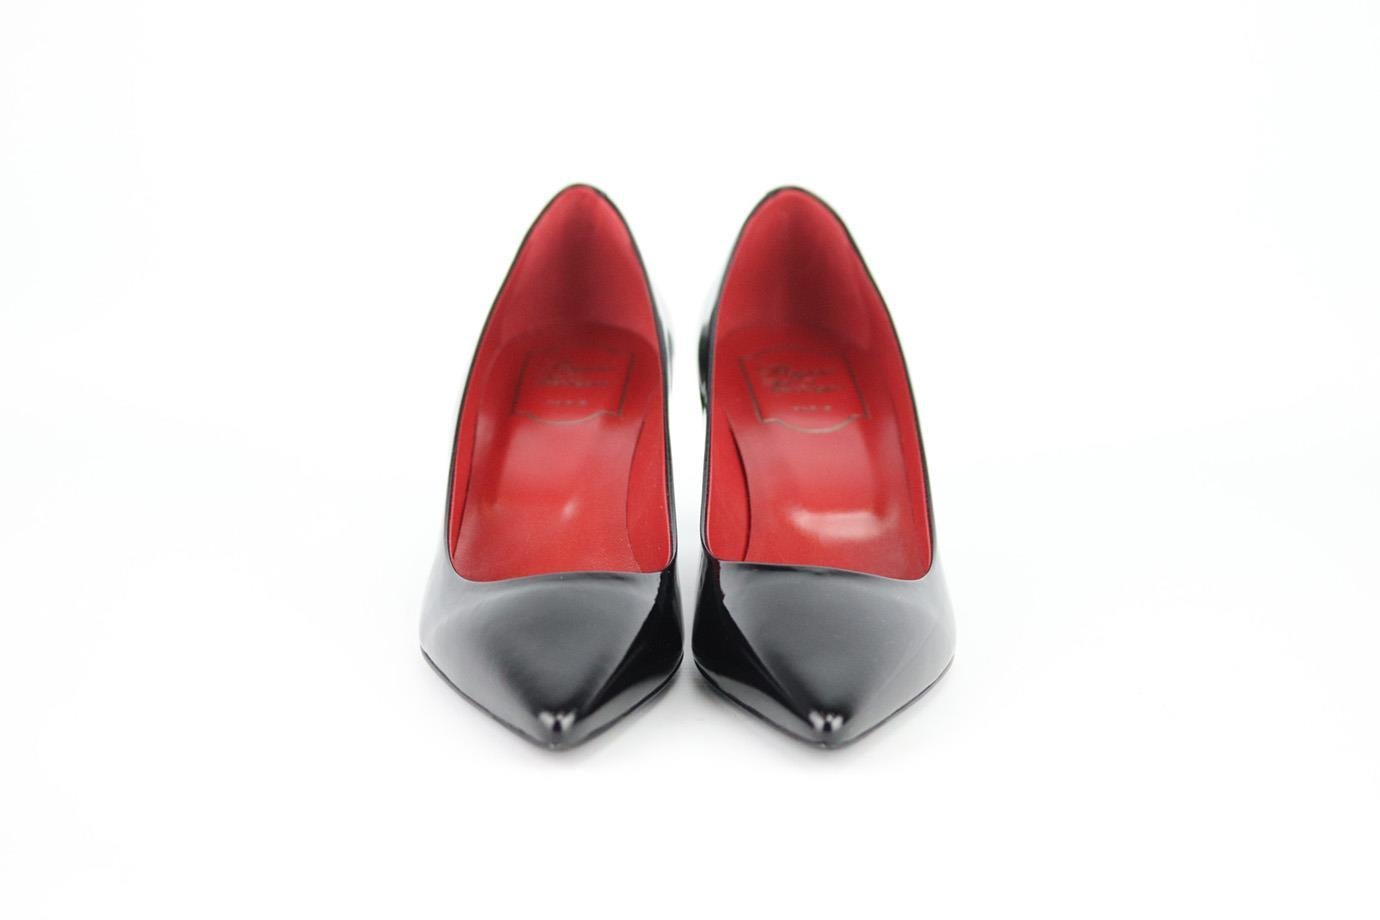 These pumps by Roger Vivier are a classic style that will never date, made in Italy from black patent-leather with red interior leather, they have sharp pointed toes and comfortable 38 mm heels to take you from morning meetings to dinner with